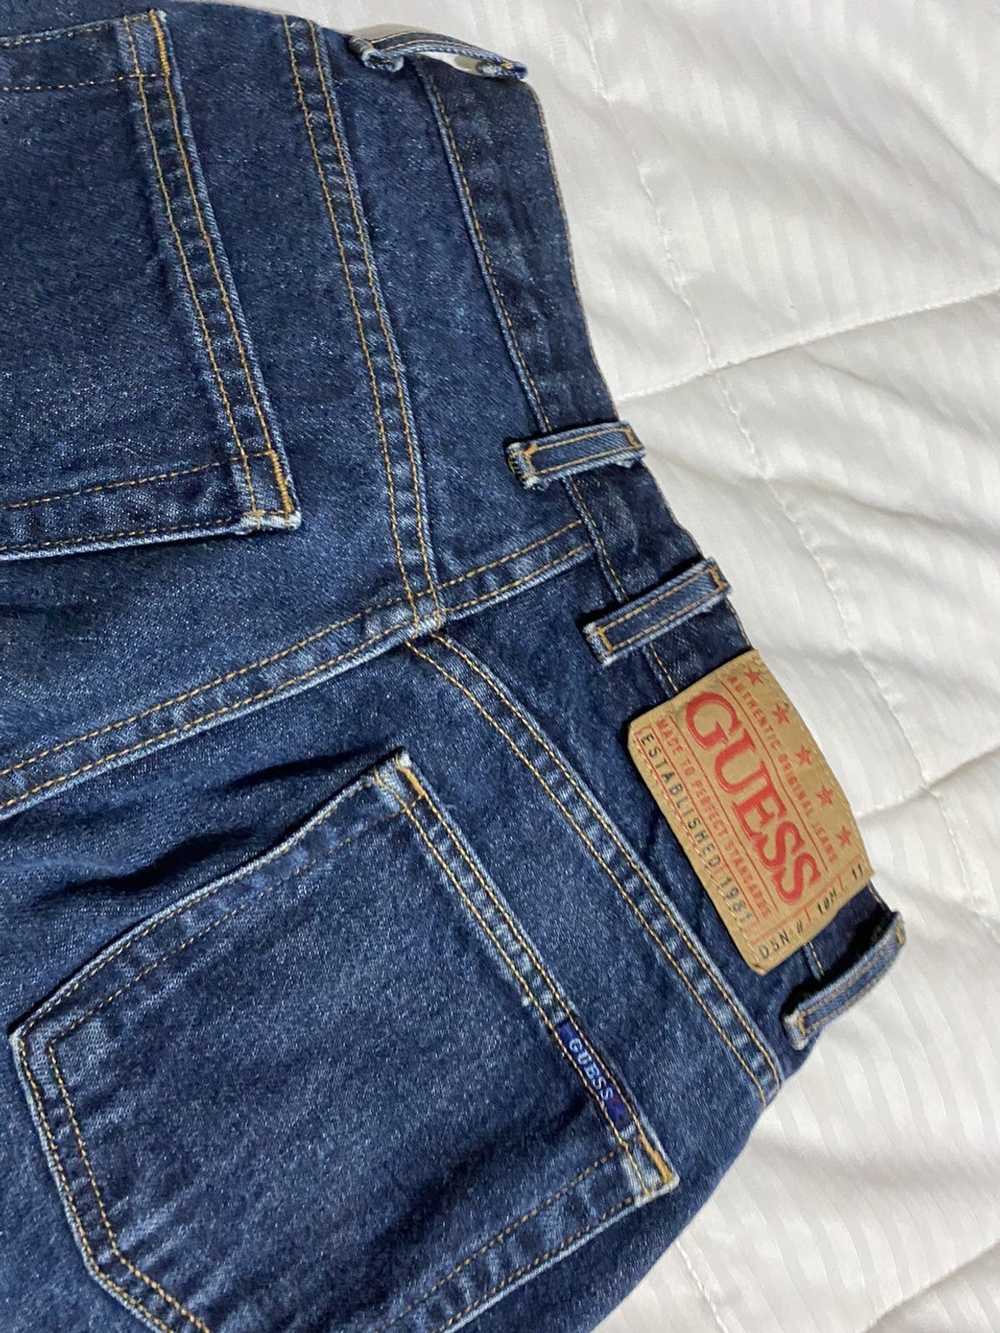 Guess Guess Vintage Jeans - image 3